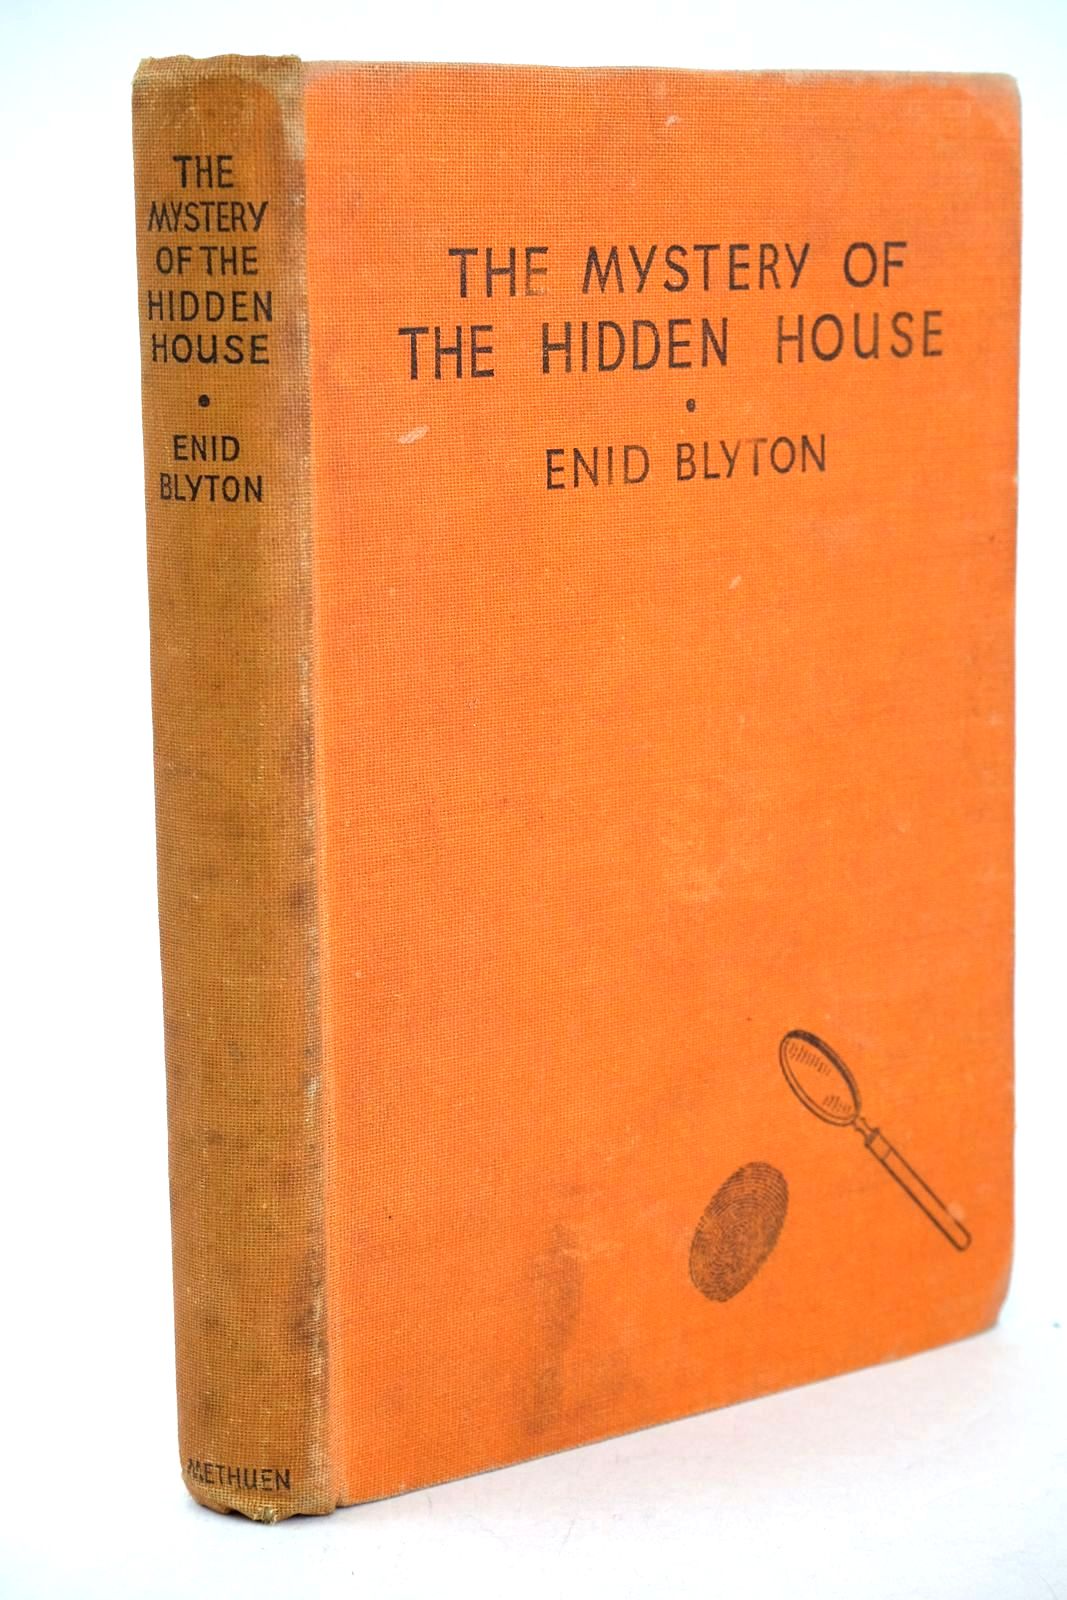 Photo of THE MYSTERY OF THE HIDDEN HOUSE written by Blyton, Enid illustrated by Abbey, J. published by Methuen &amp; Co. Ltd. (STOCK CODE: 1326916)  for sale by Stella & Rose's Books